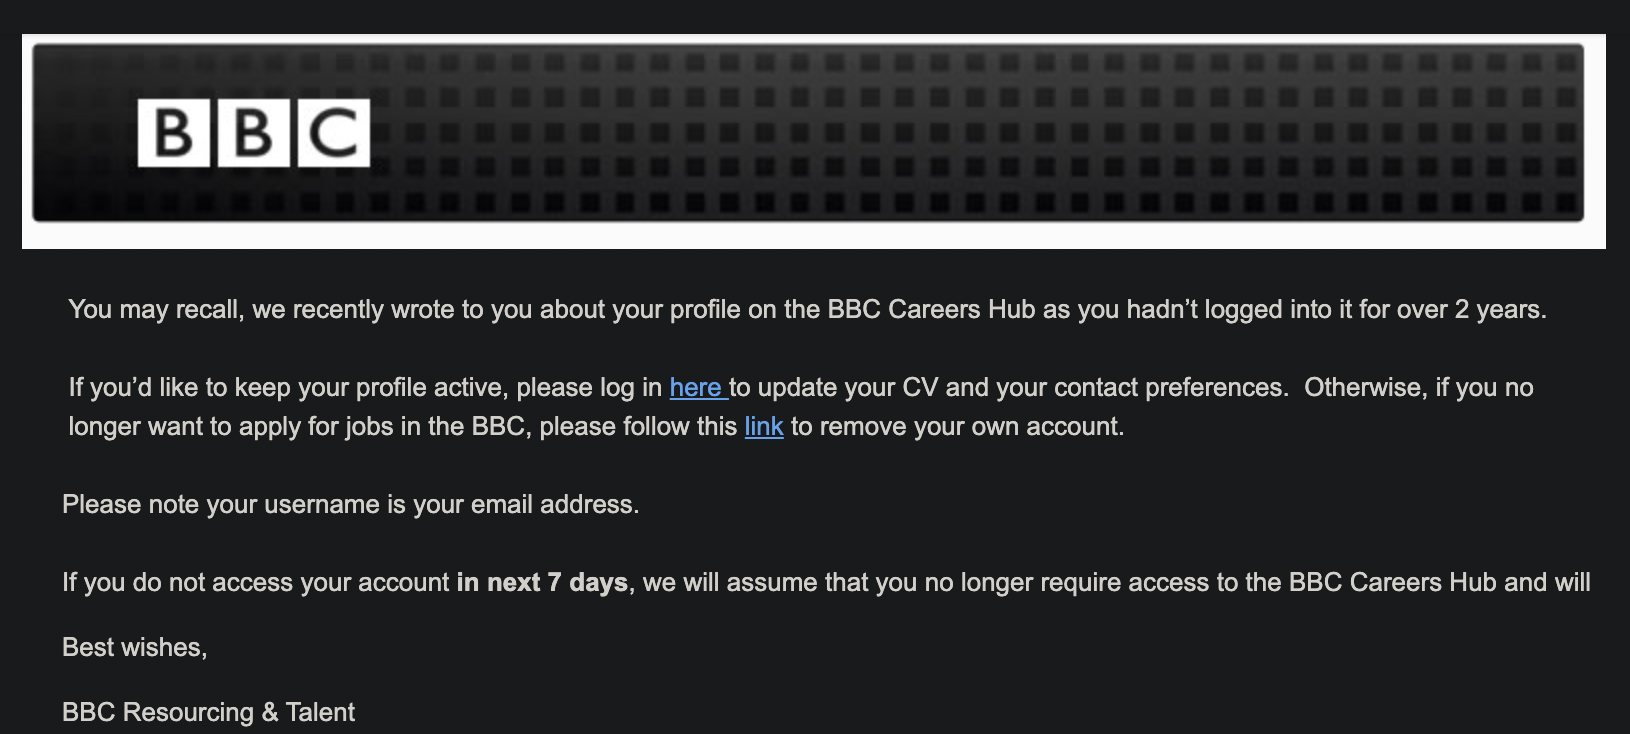 BBC Careers Hub profile reactivation email.